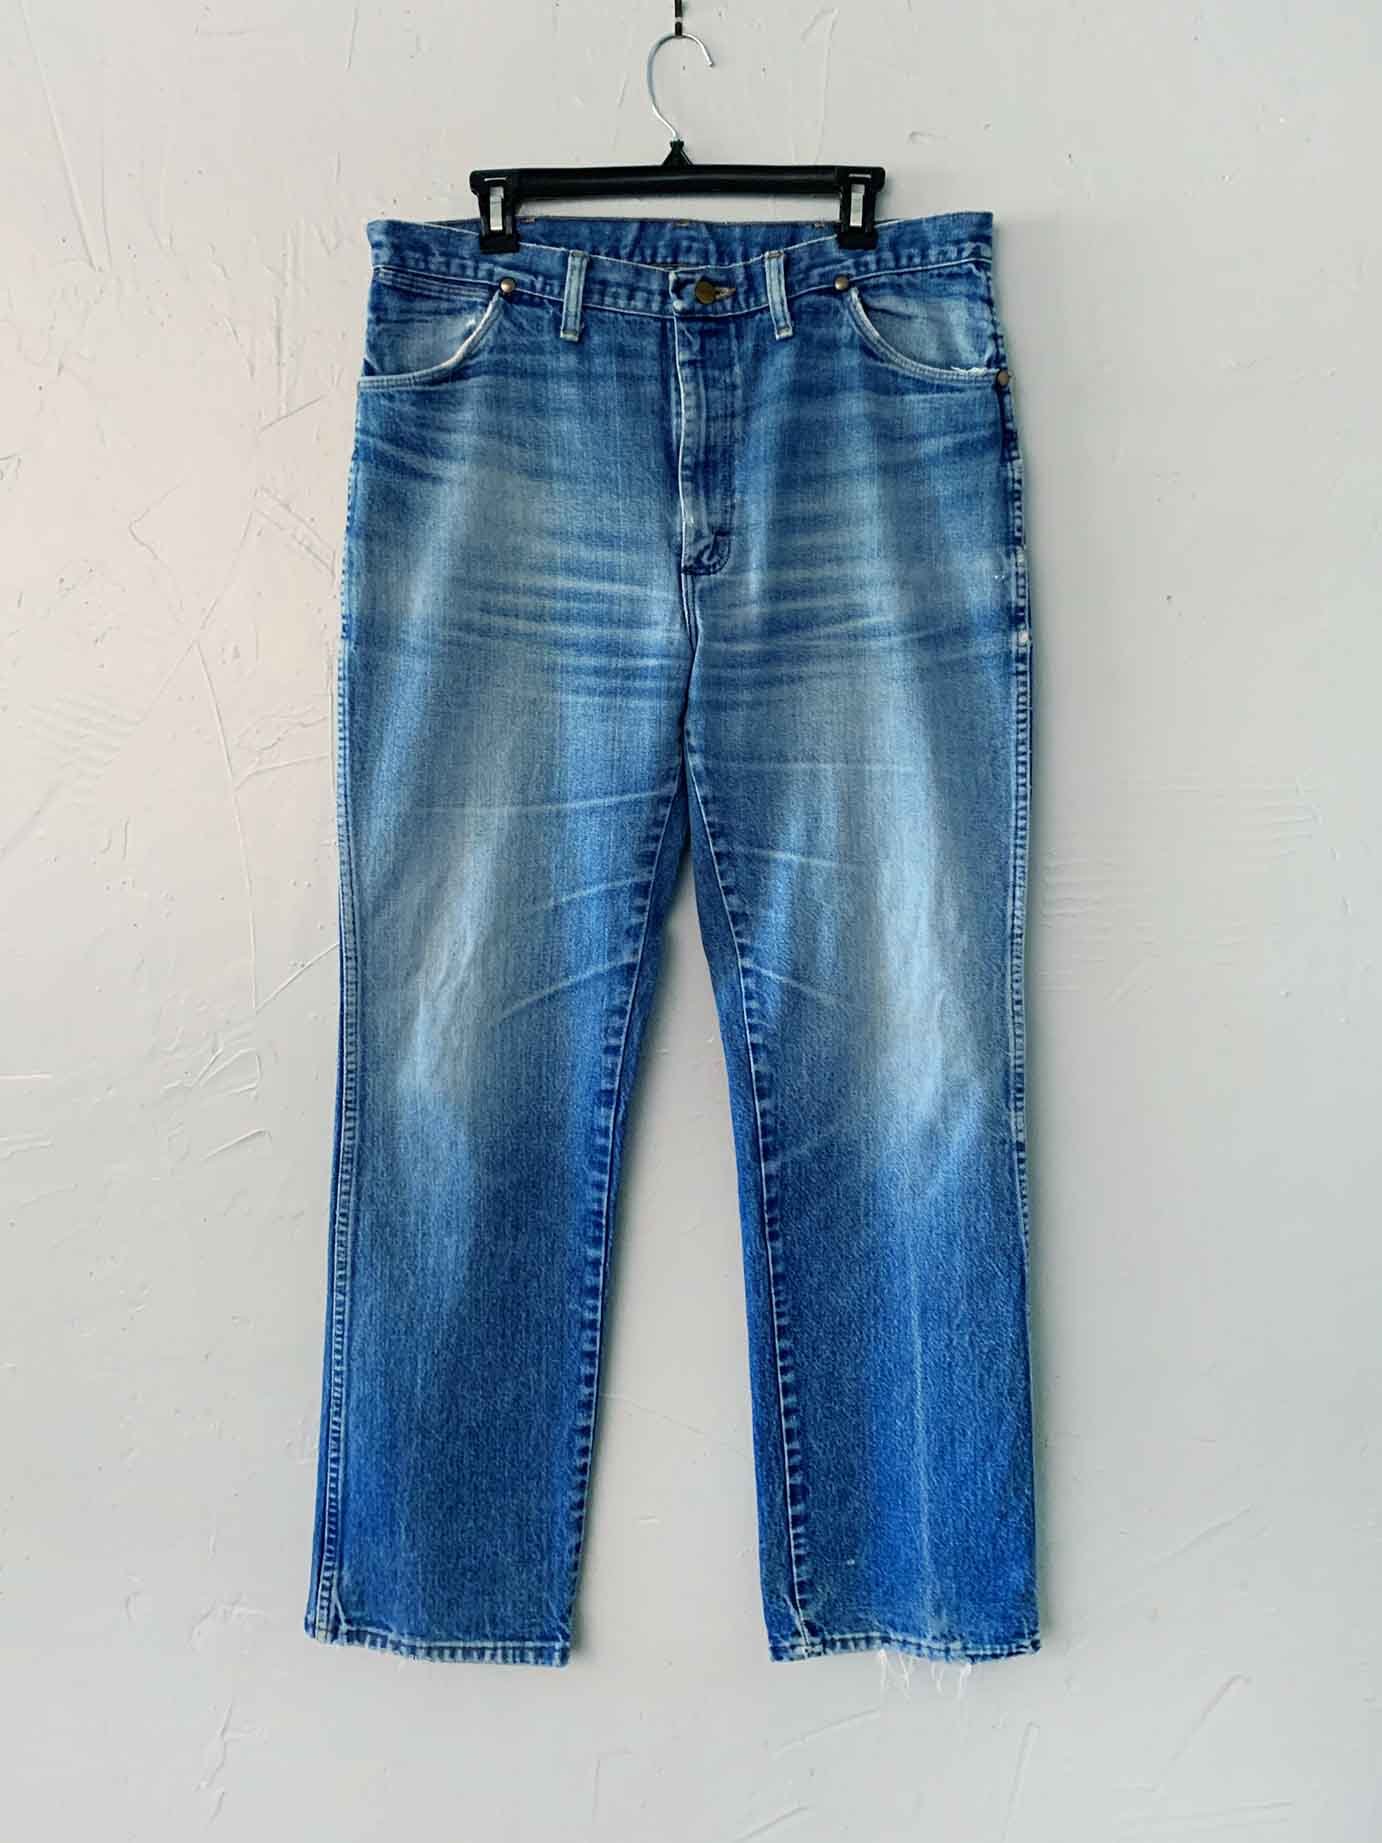 Image of Wrangler Jeans - Made in USA - 38x33